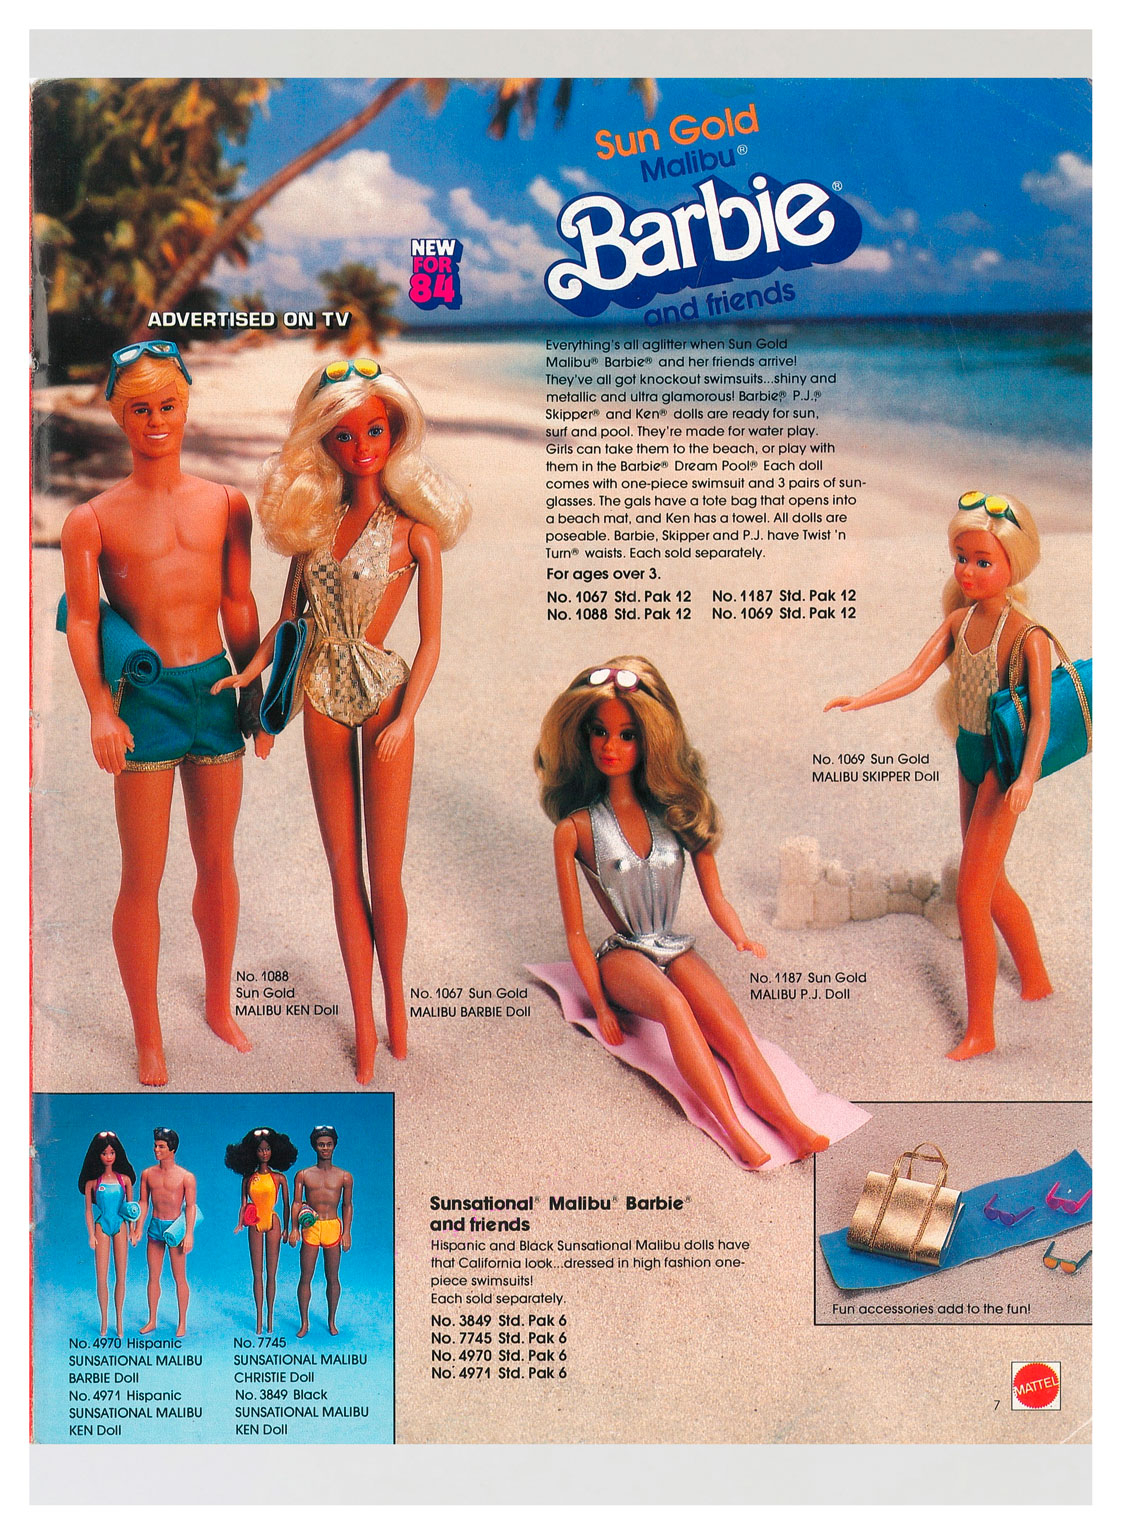 From 1984 Mattel Toys catalogue